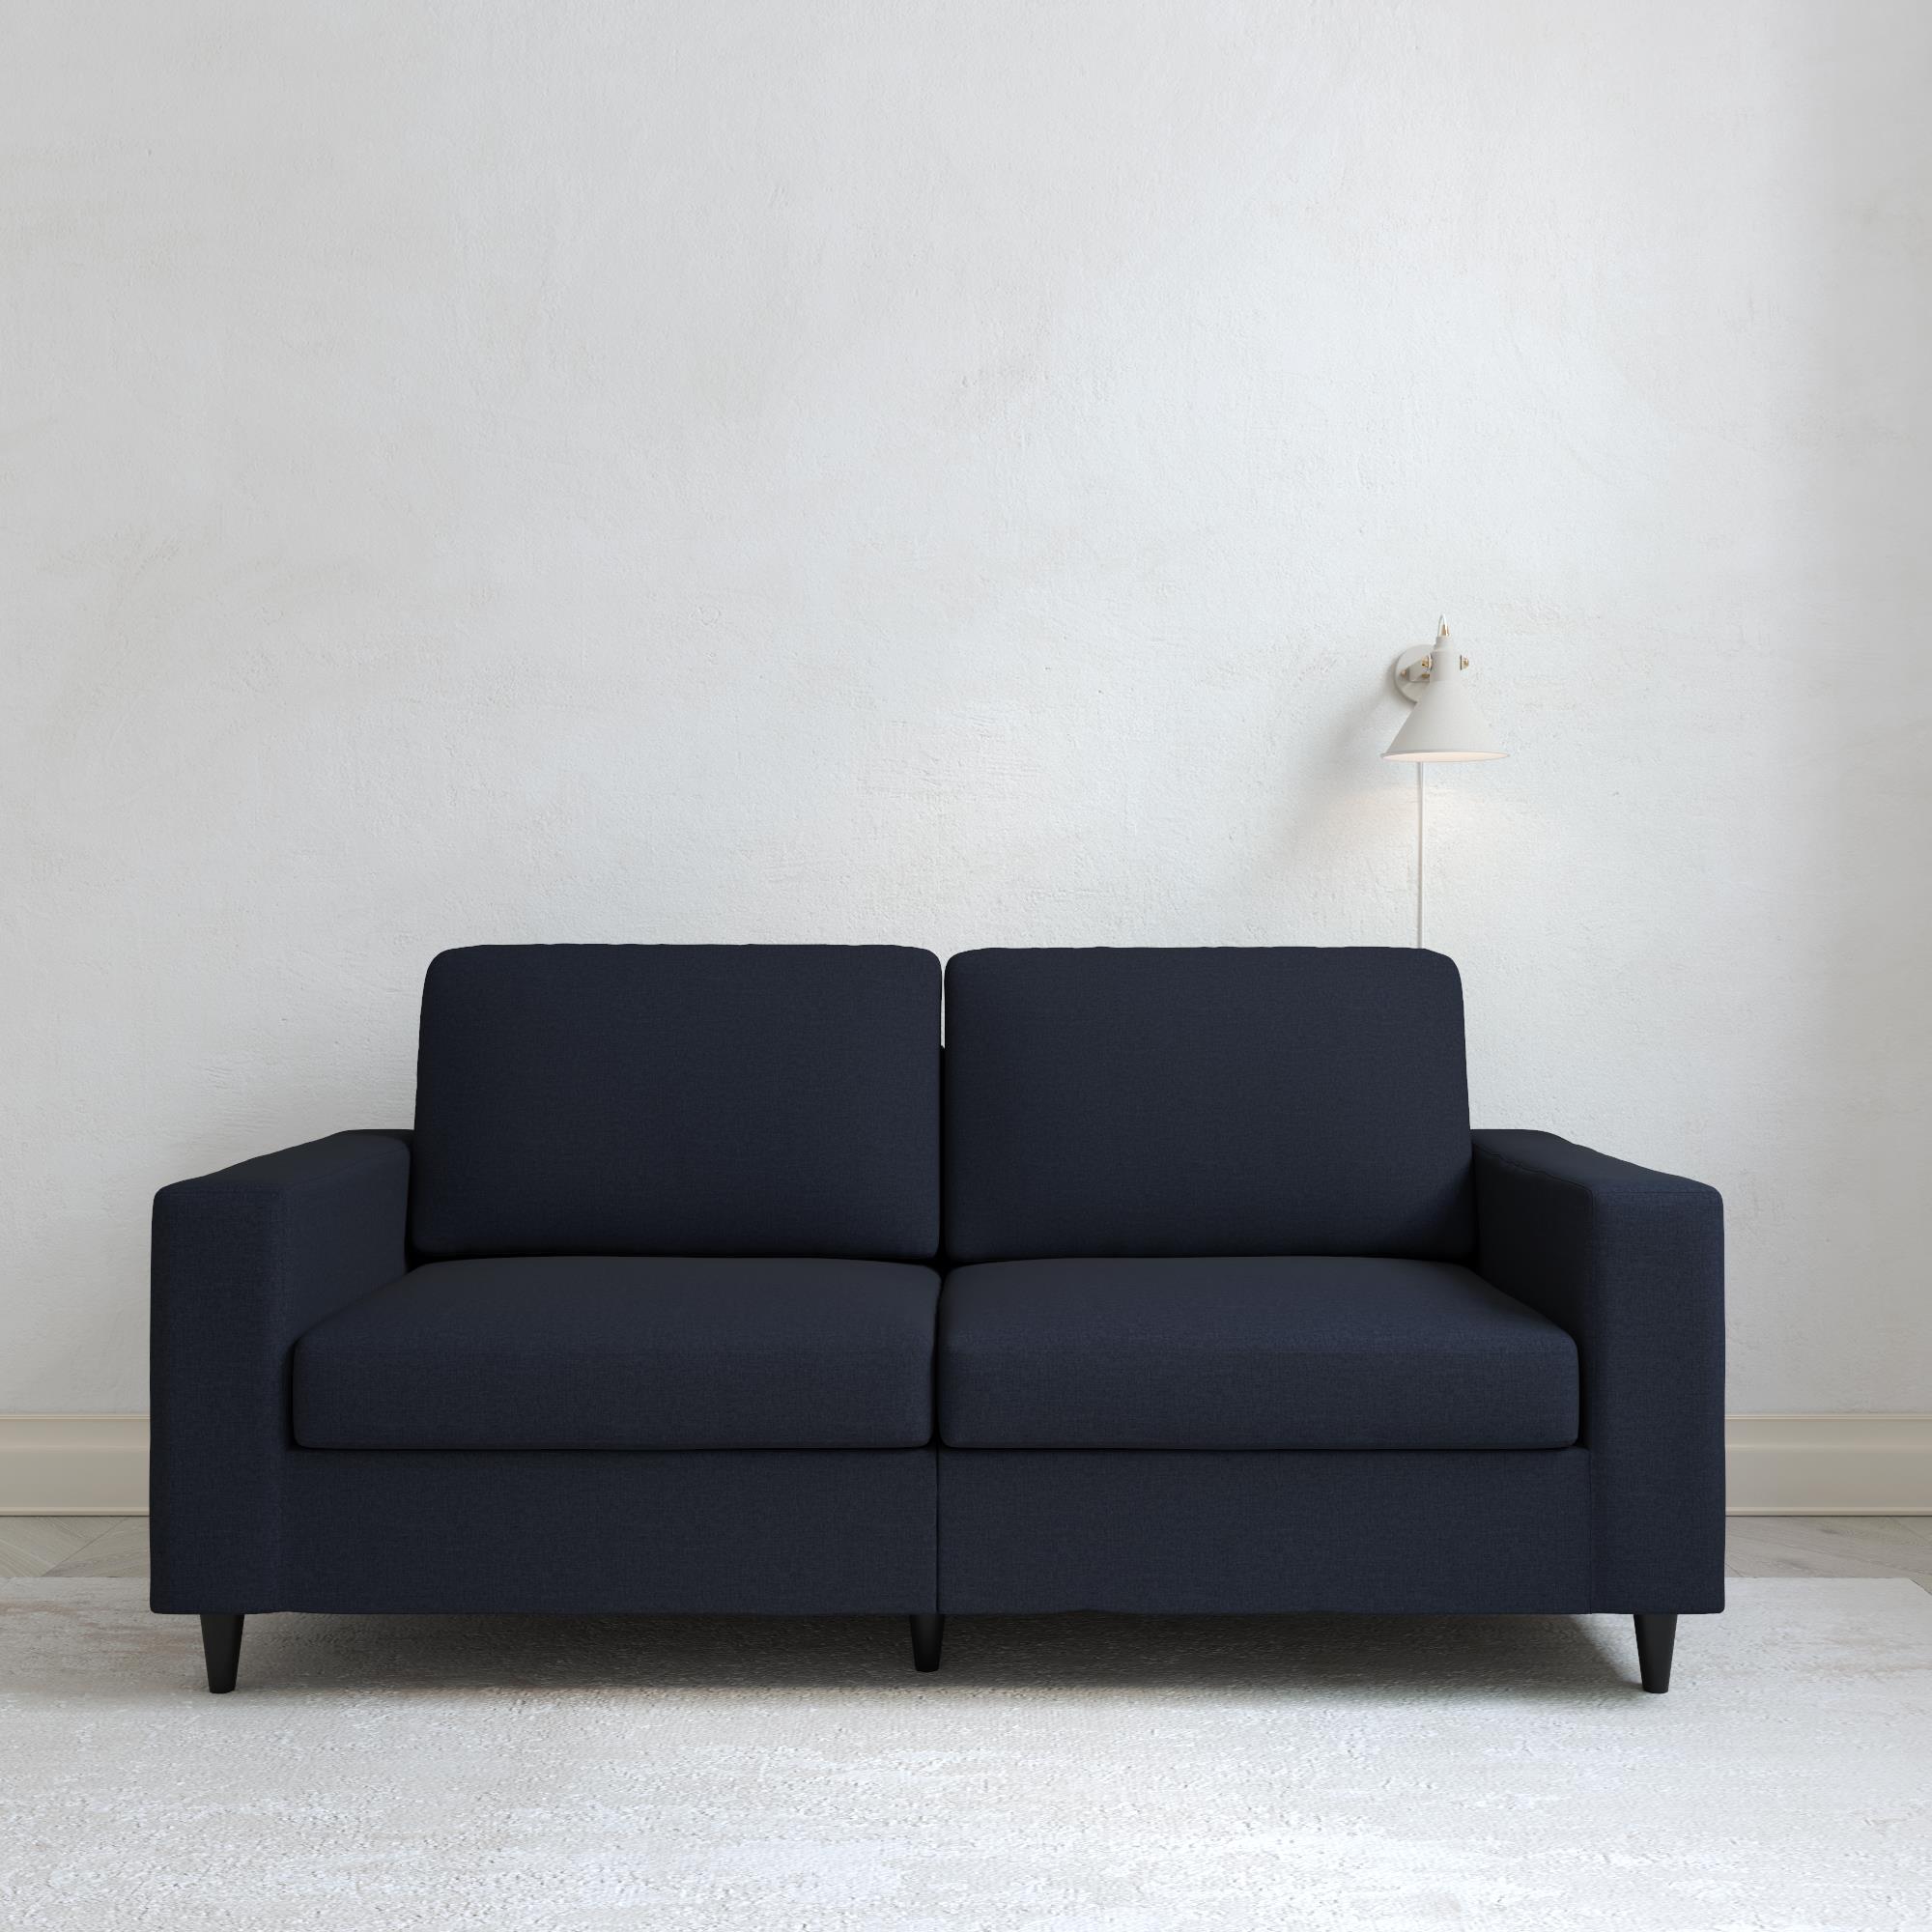 DHP Cooper 3 Seater Sofa, Blue Linen - image 4 of 18